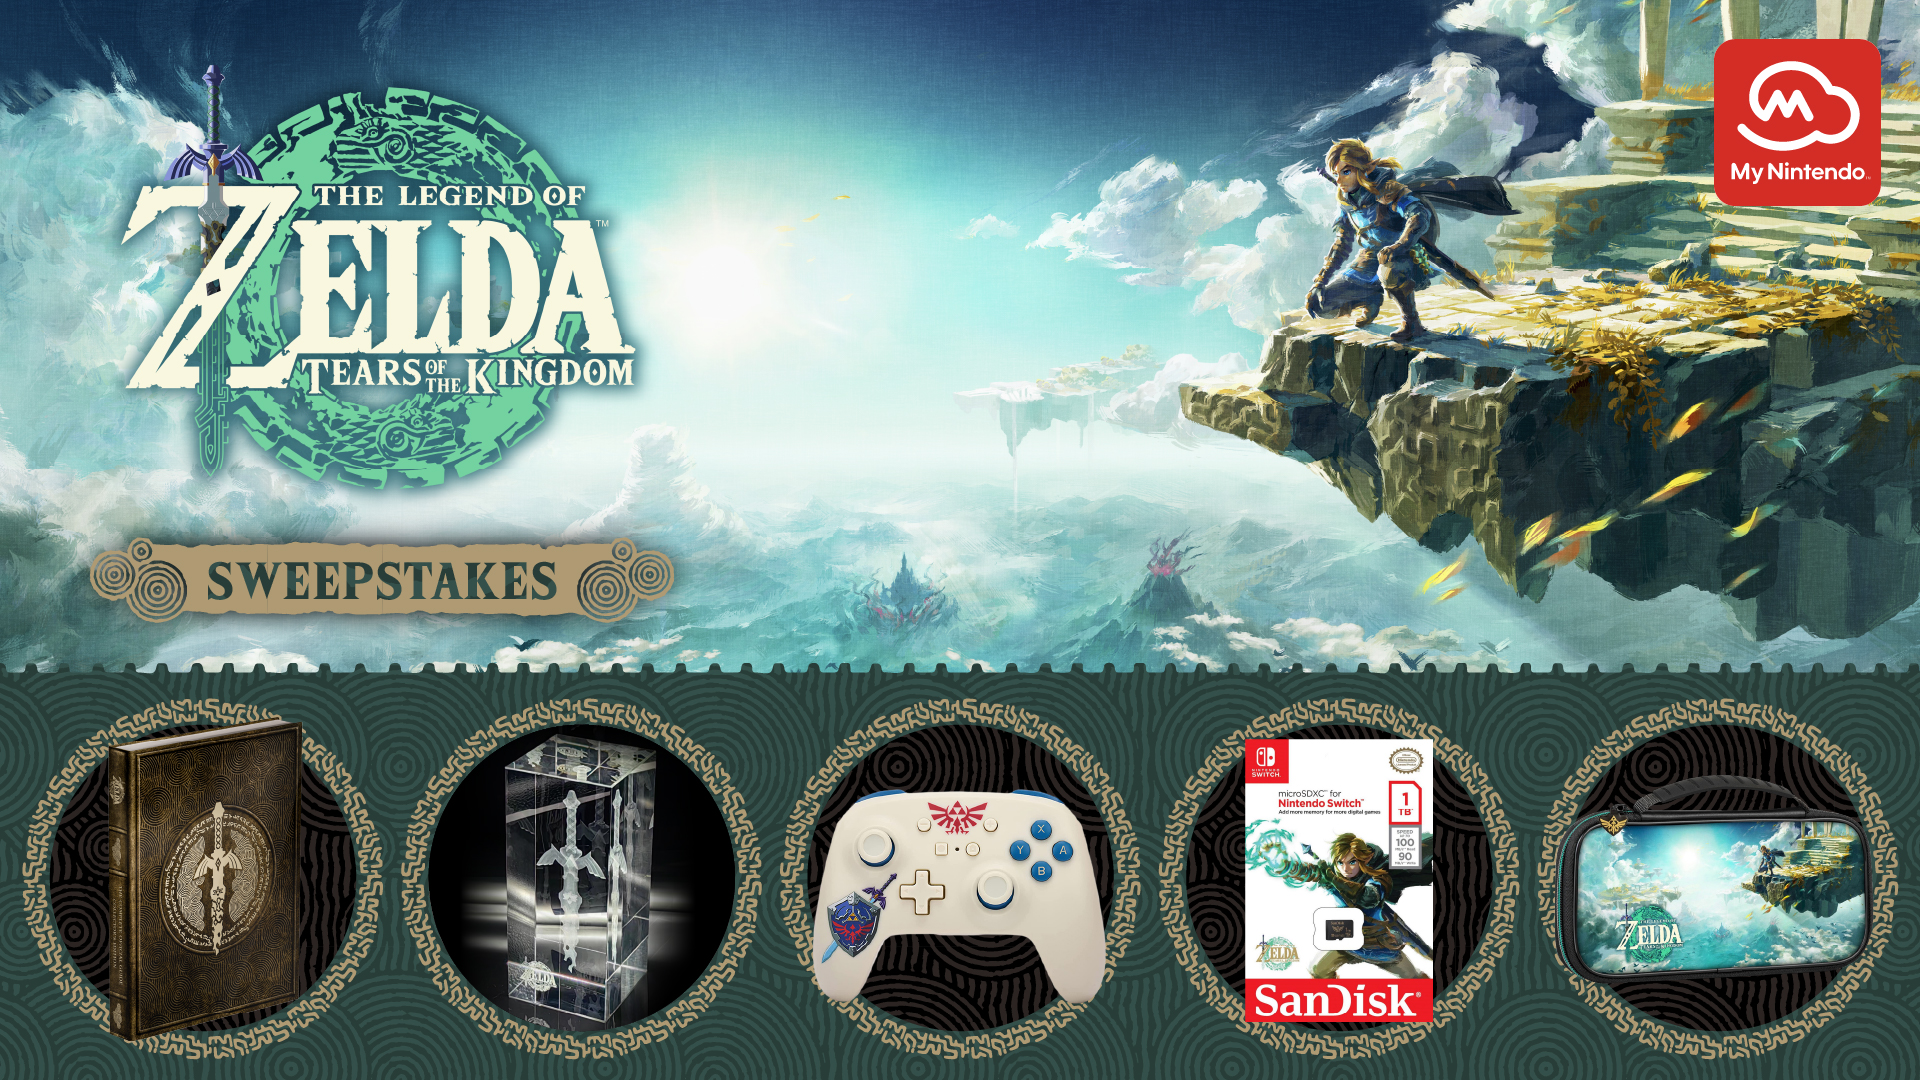 Enter to win Zelda: Tears of the Kingdom prizes in Nintendo sweepstakes